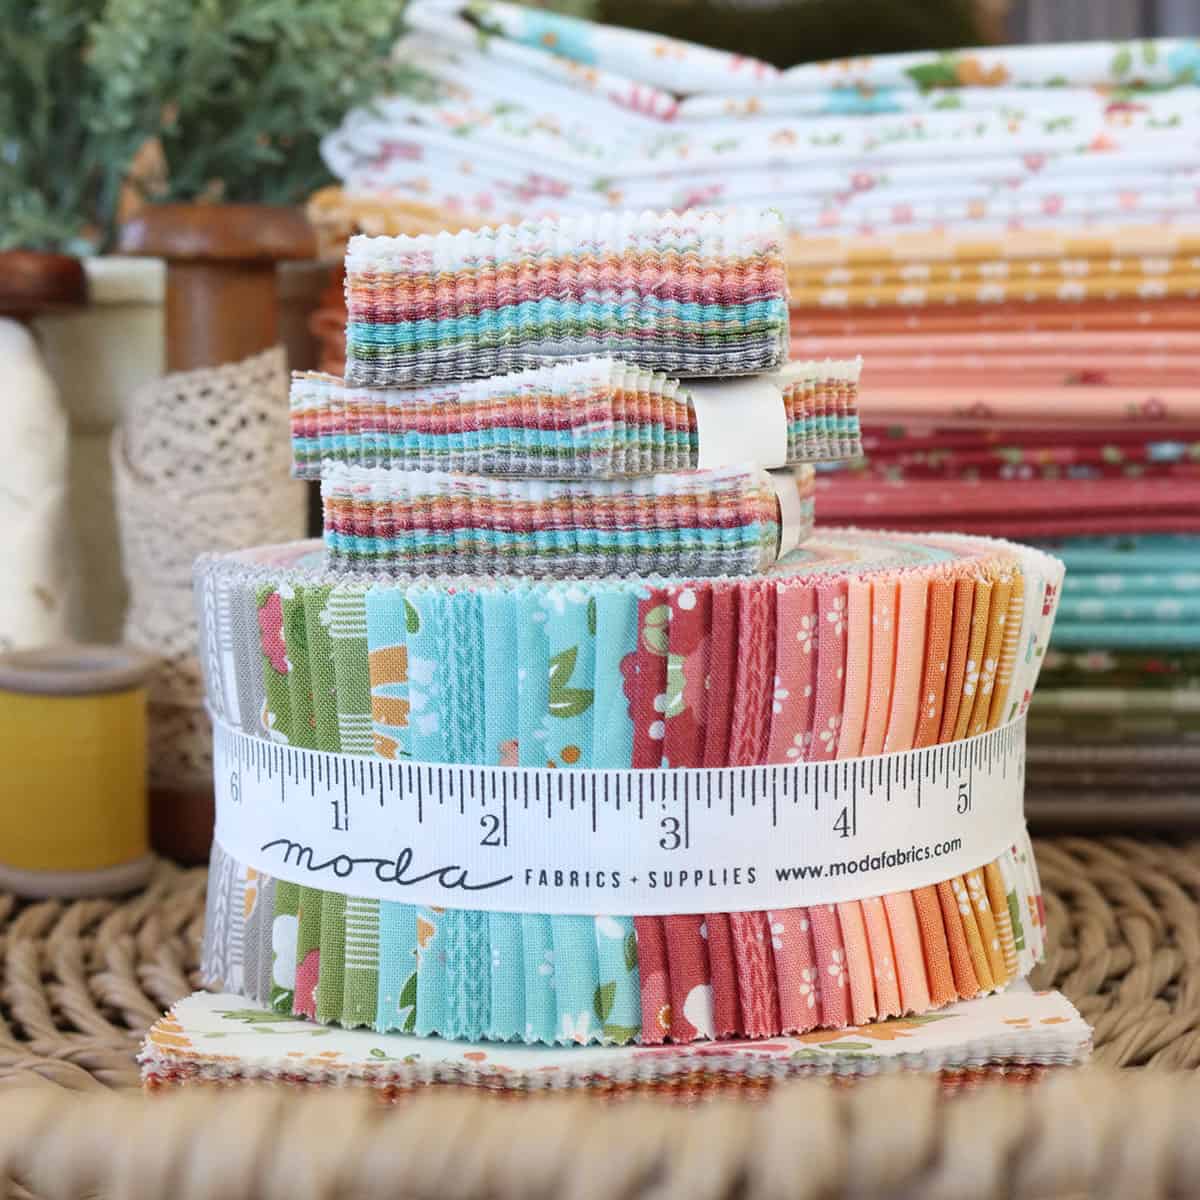 How Many Jelly Rolls Needed To Make A Queen Size Quilt